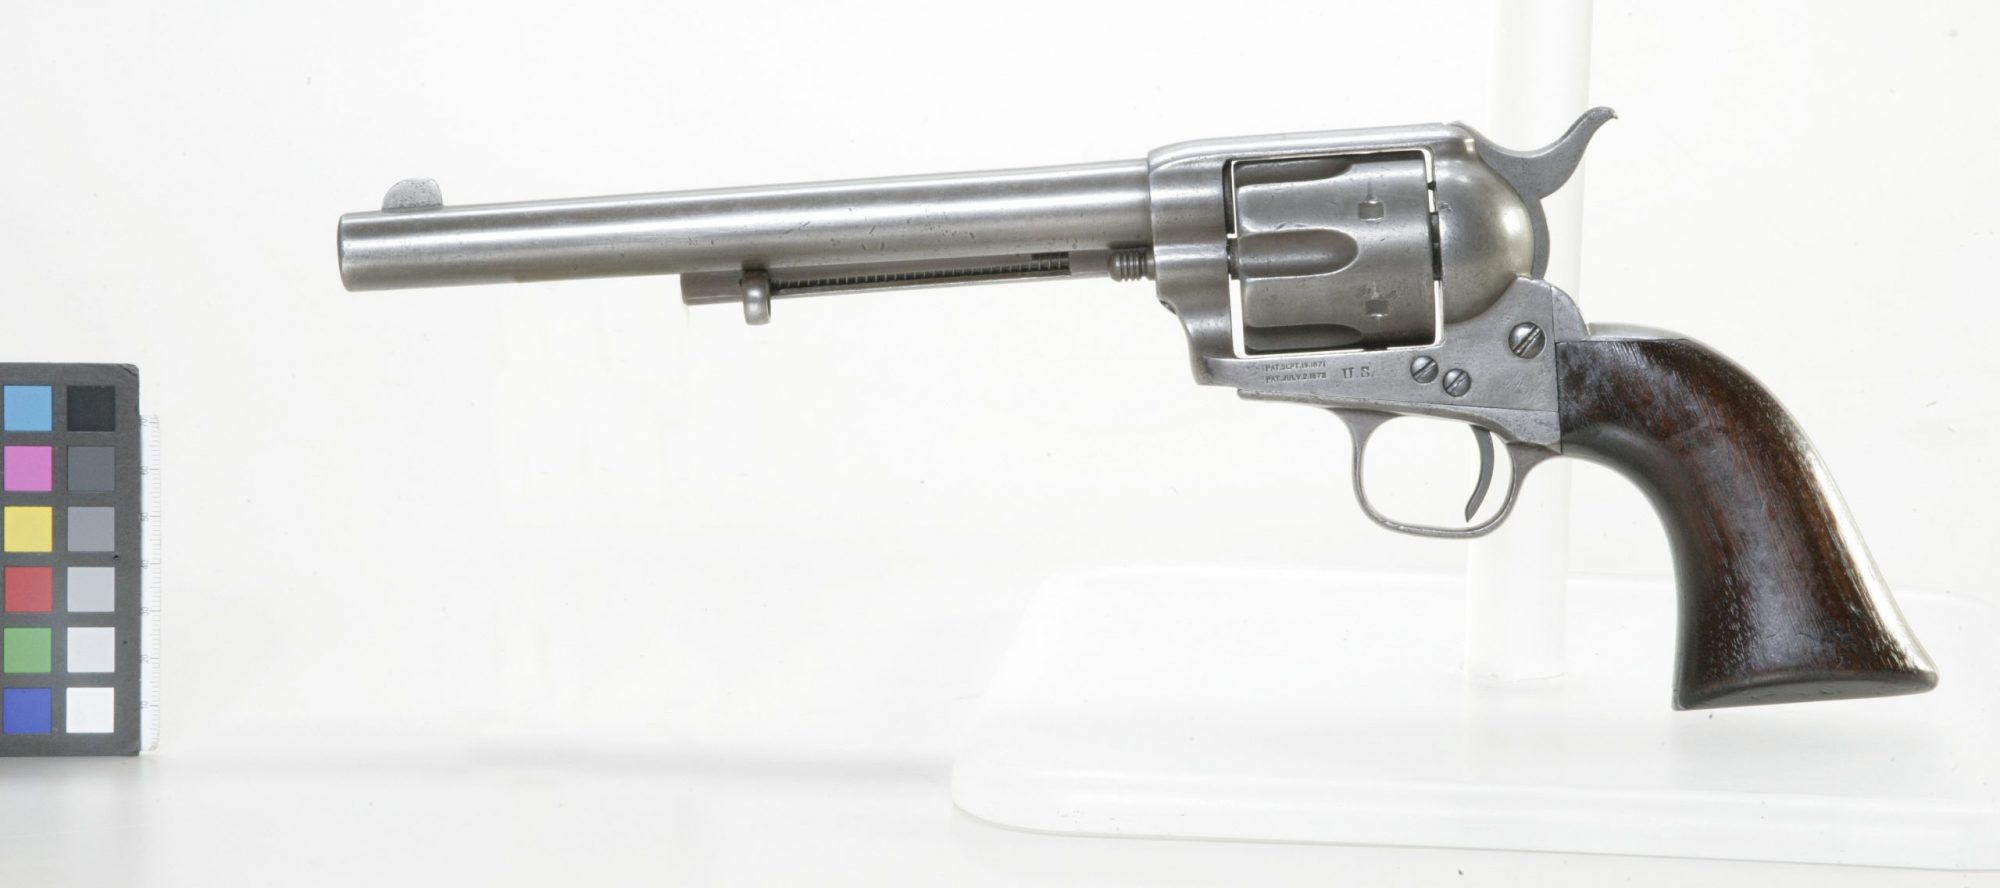 This early Colt Single Action Army, SN 5405, has an 1874 production date and U.S. military stamps. It was turned over by Sitting Bull to the Canadians and is now in the Canadian War Museum (Photo: CWM)